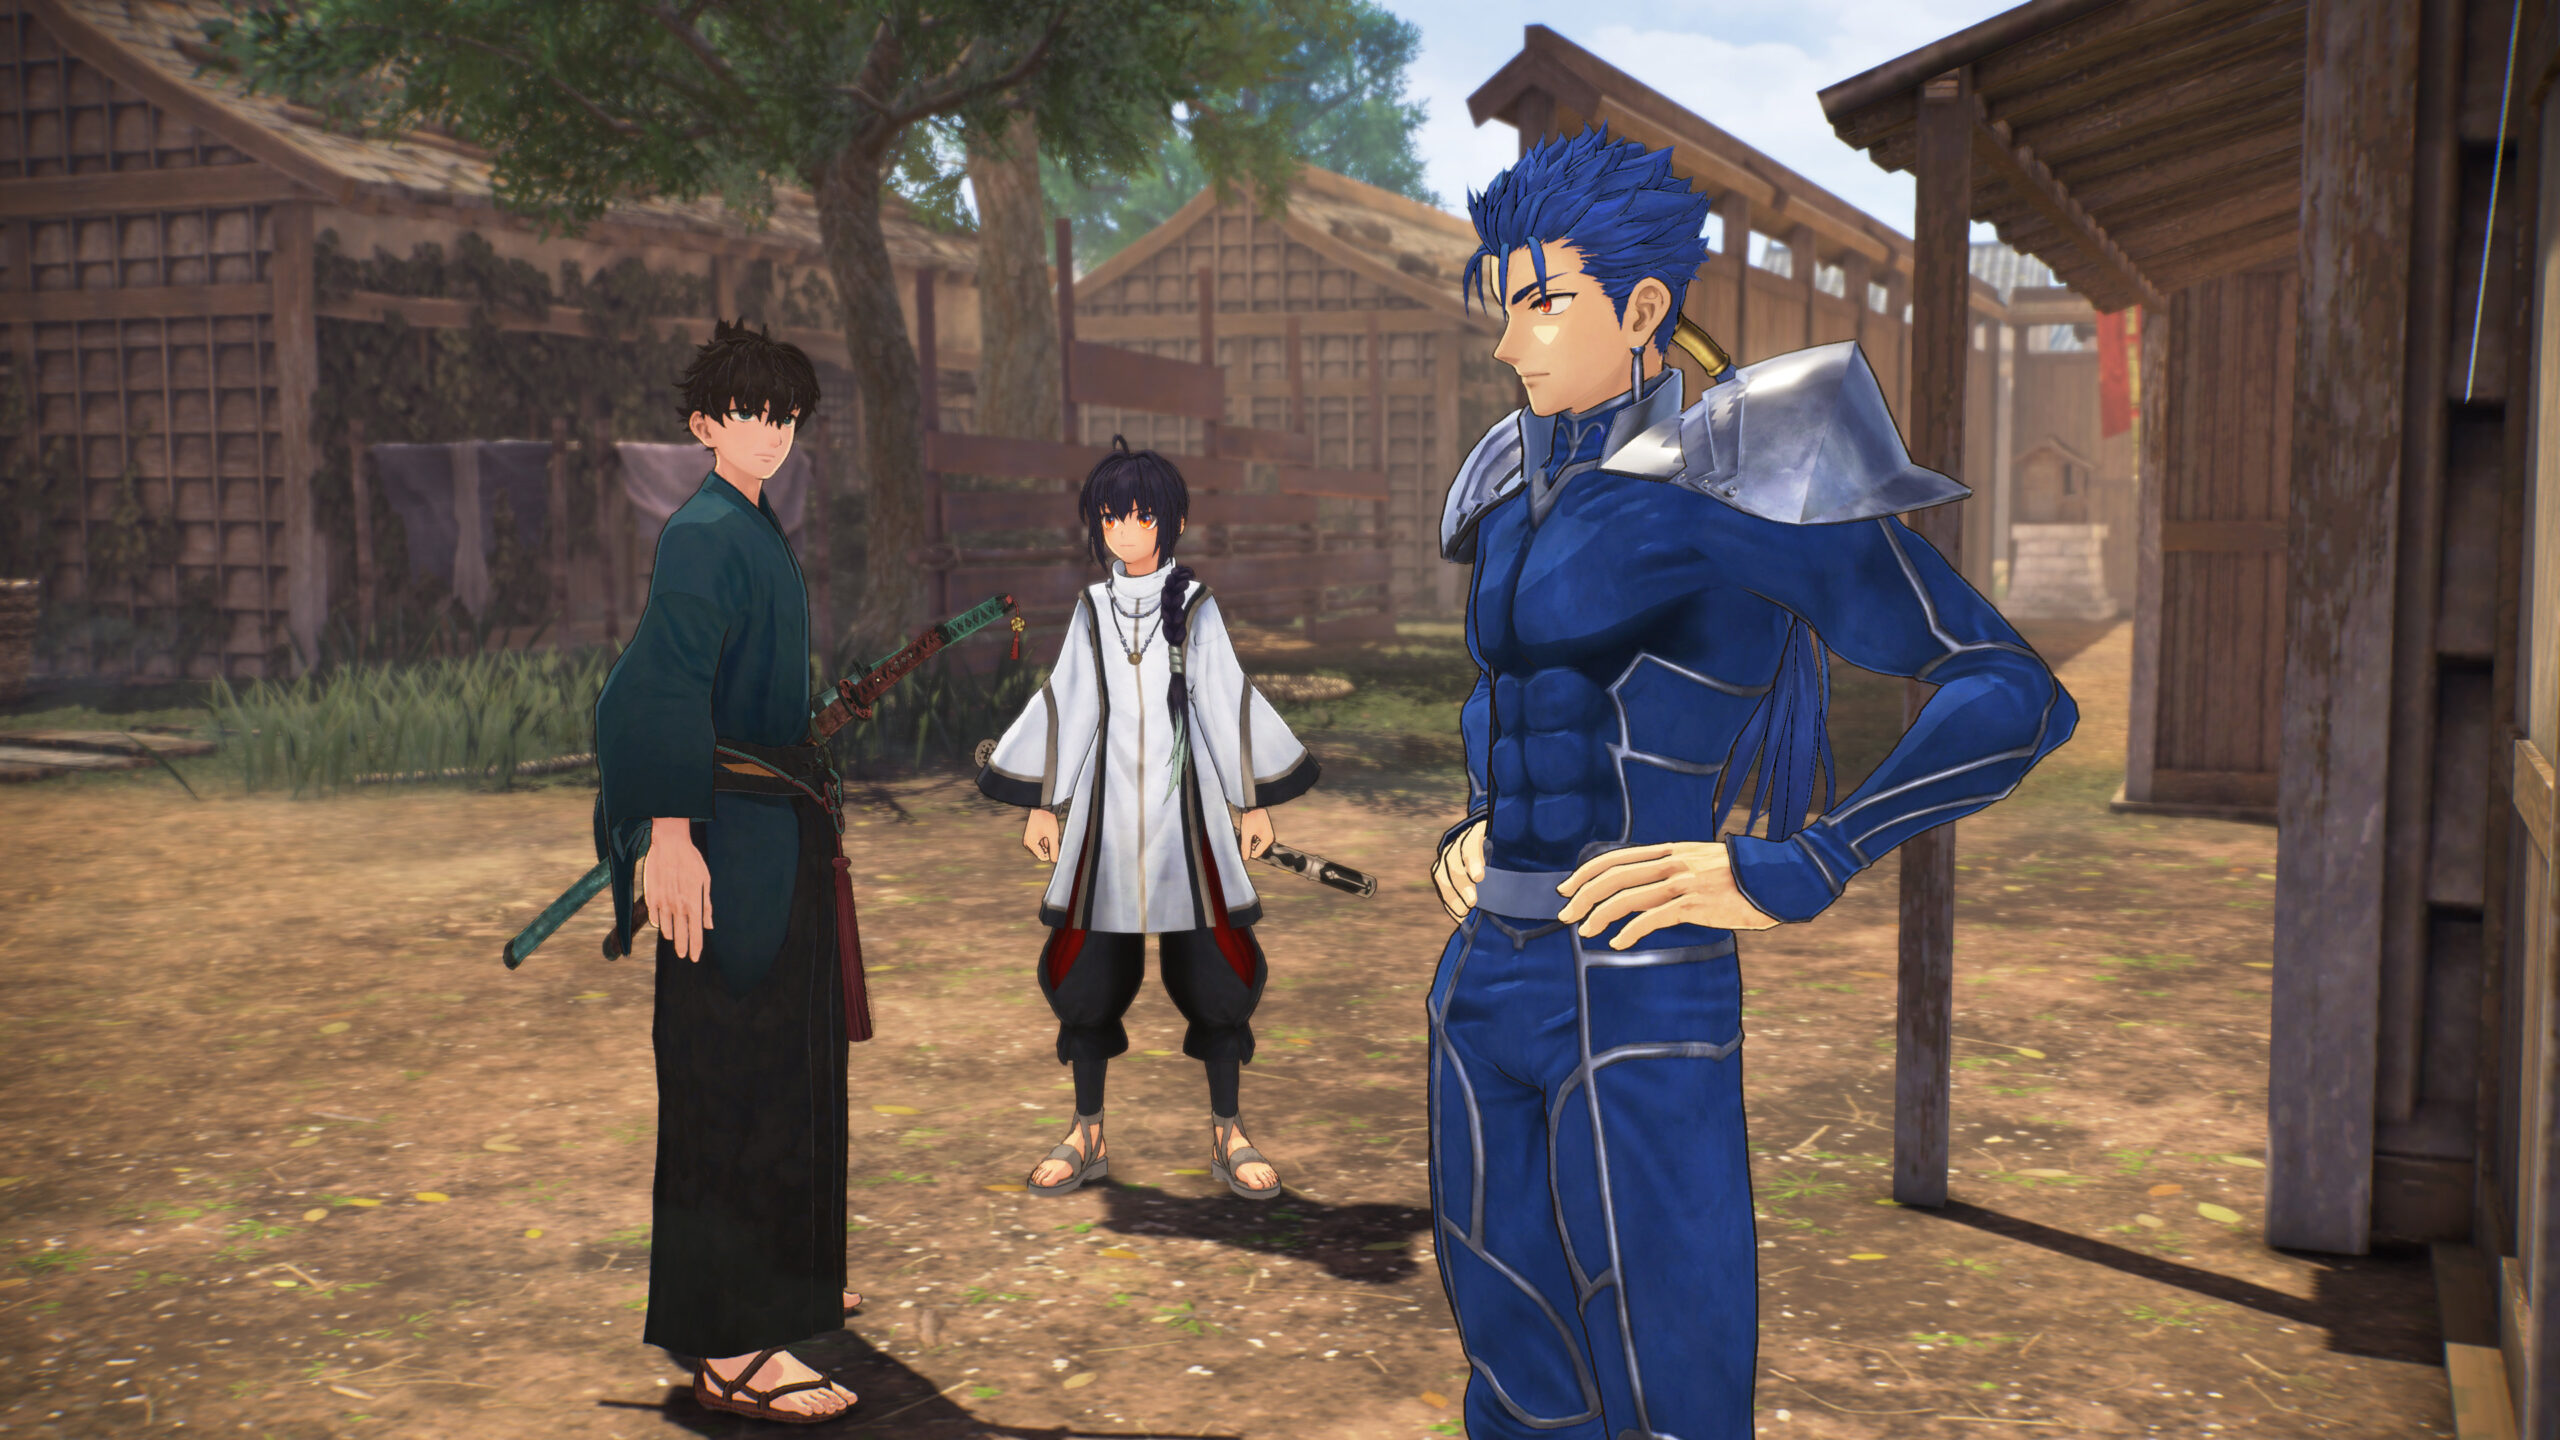 Fate/Samurai Remnant: Hands-On With the First 8 Hours